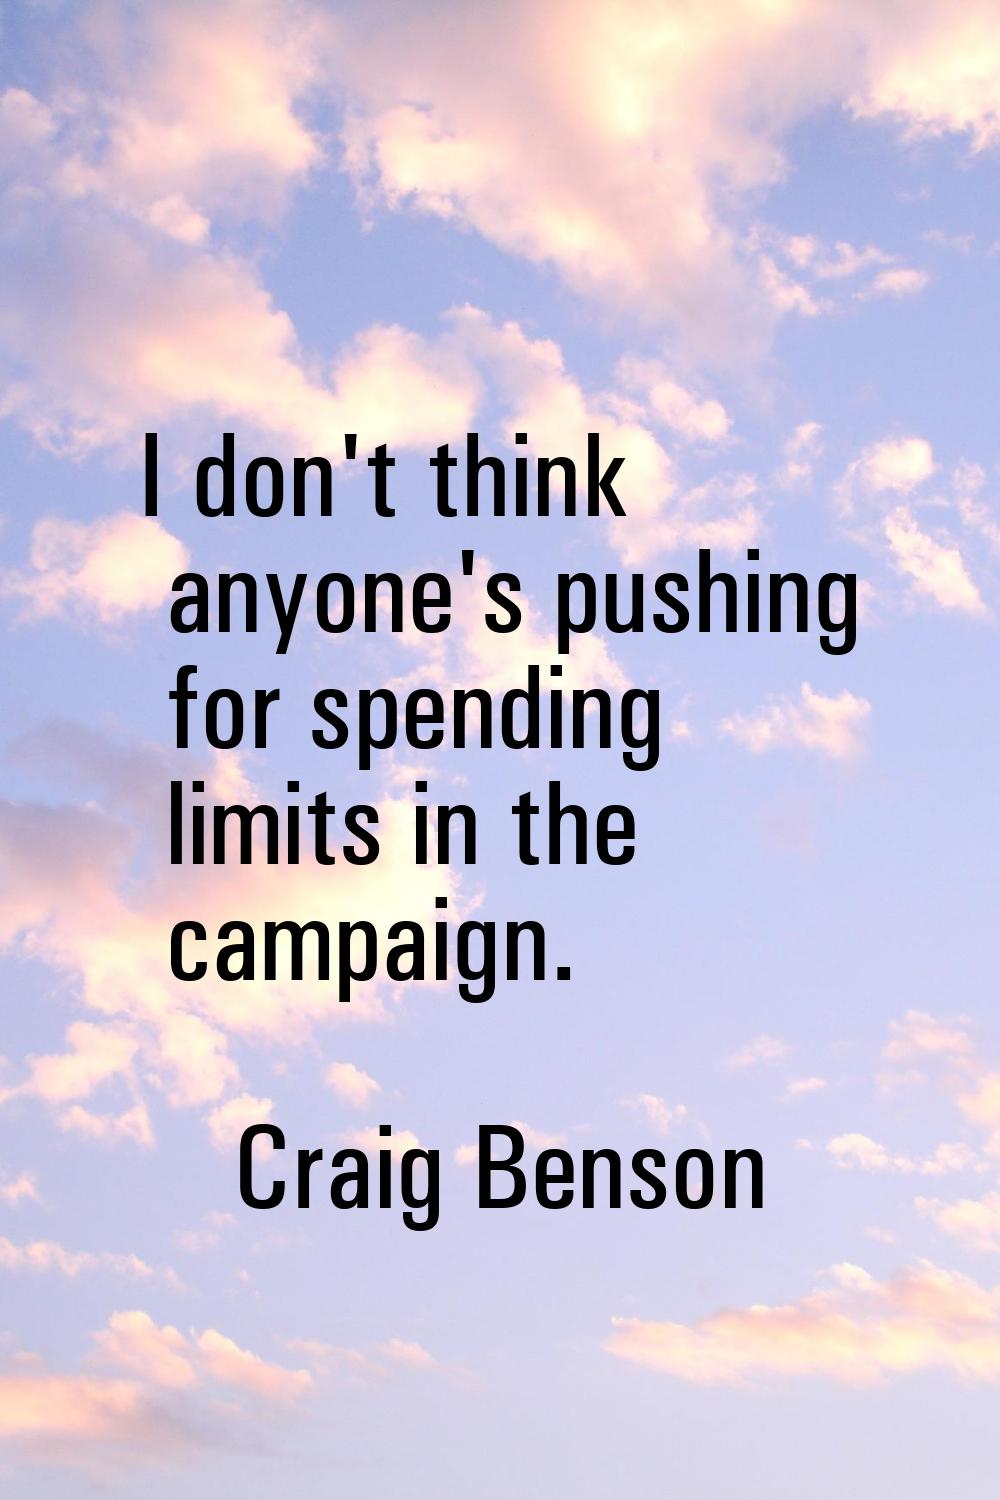 I don't think anyone's pushing for spending limits in the campaign.